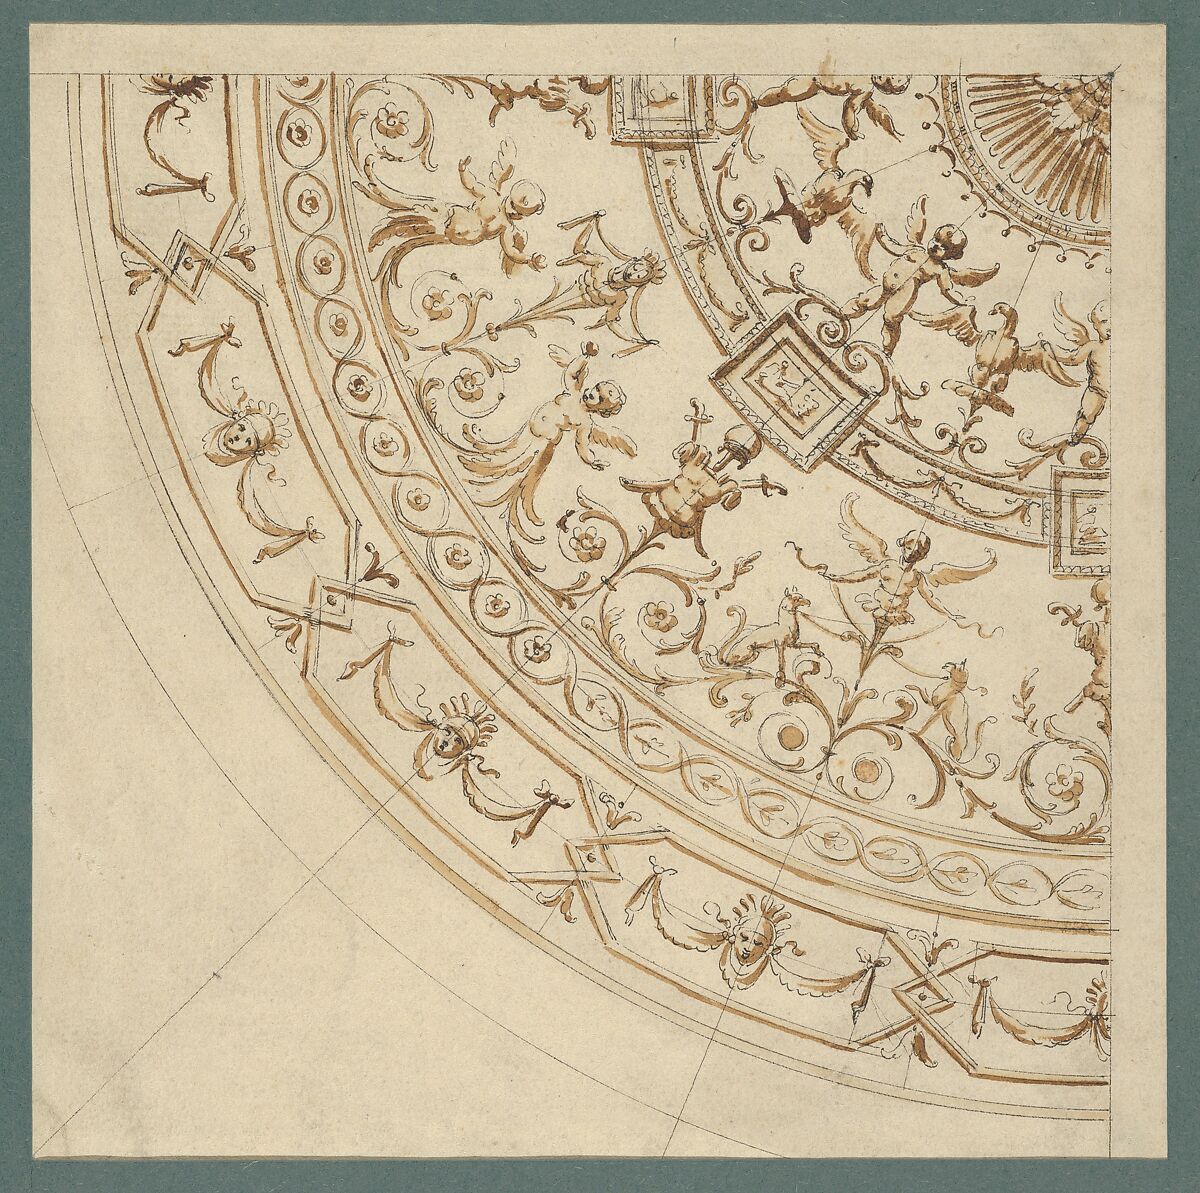 Quarter of a Ceiling with Grotesque Decorations, Guiseppe Mannocchi (Italian, 1731–1782), Pen and black ink with light-brown wash 